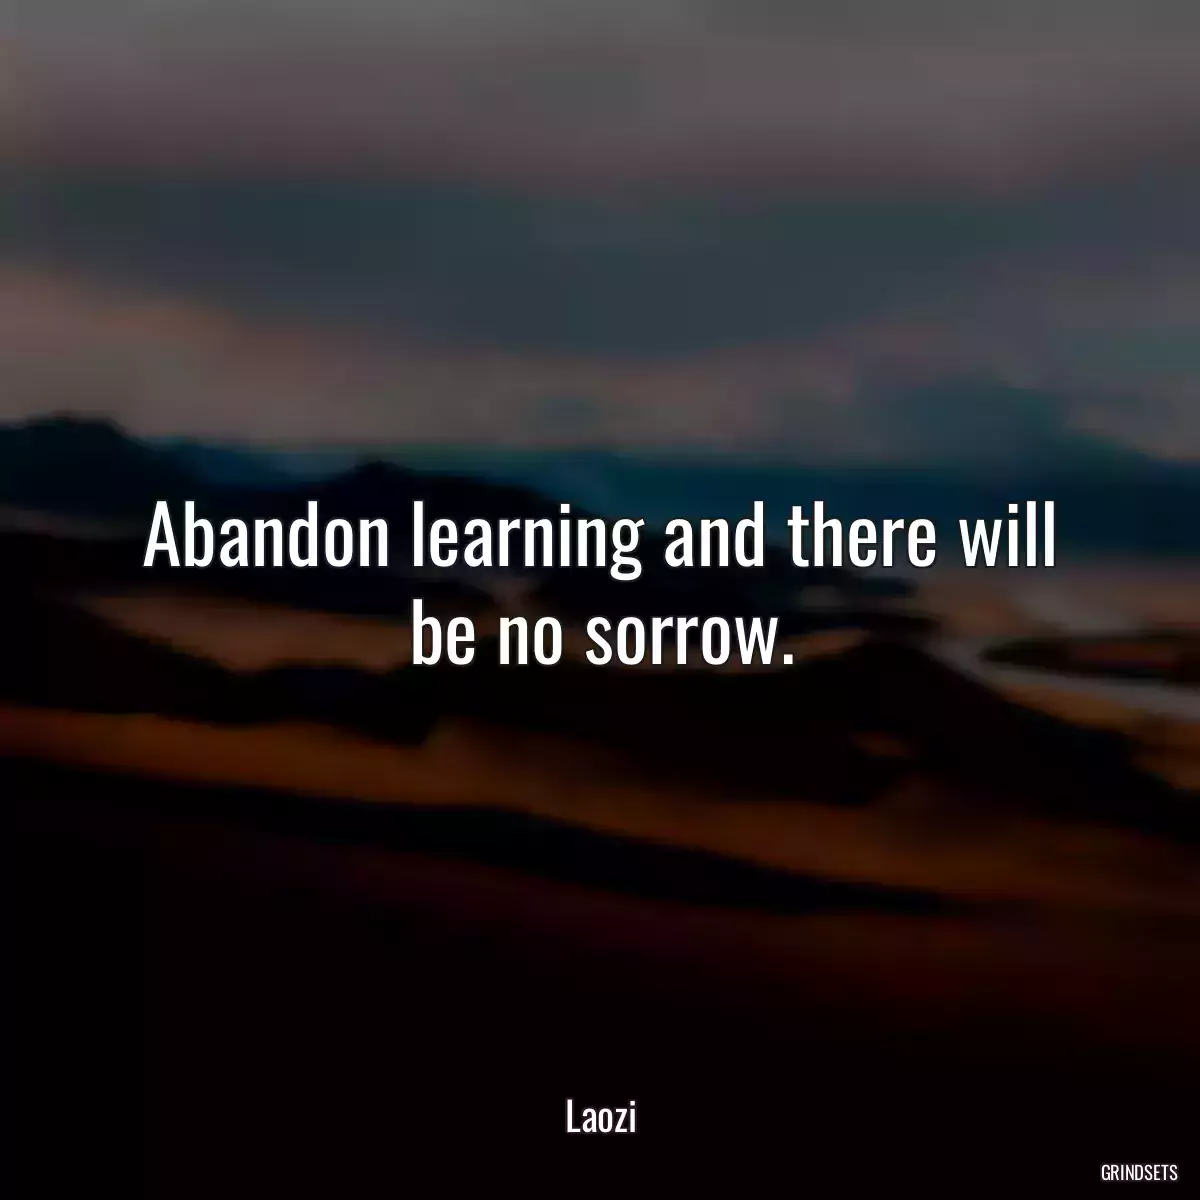 Abandon learning and there will be no sorrow.